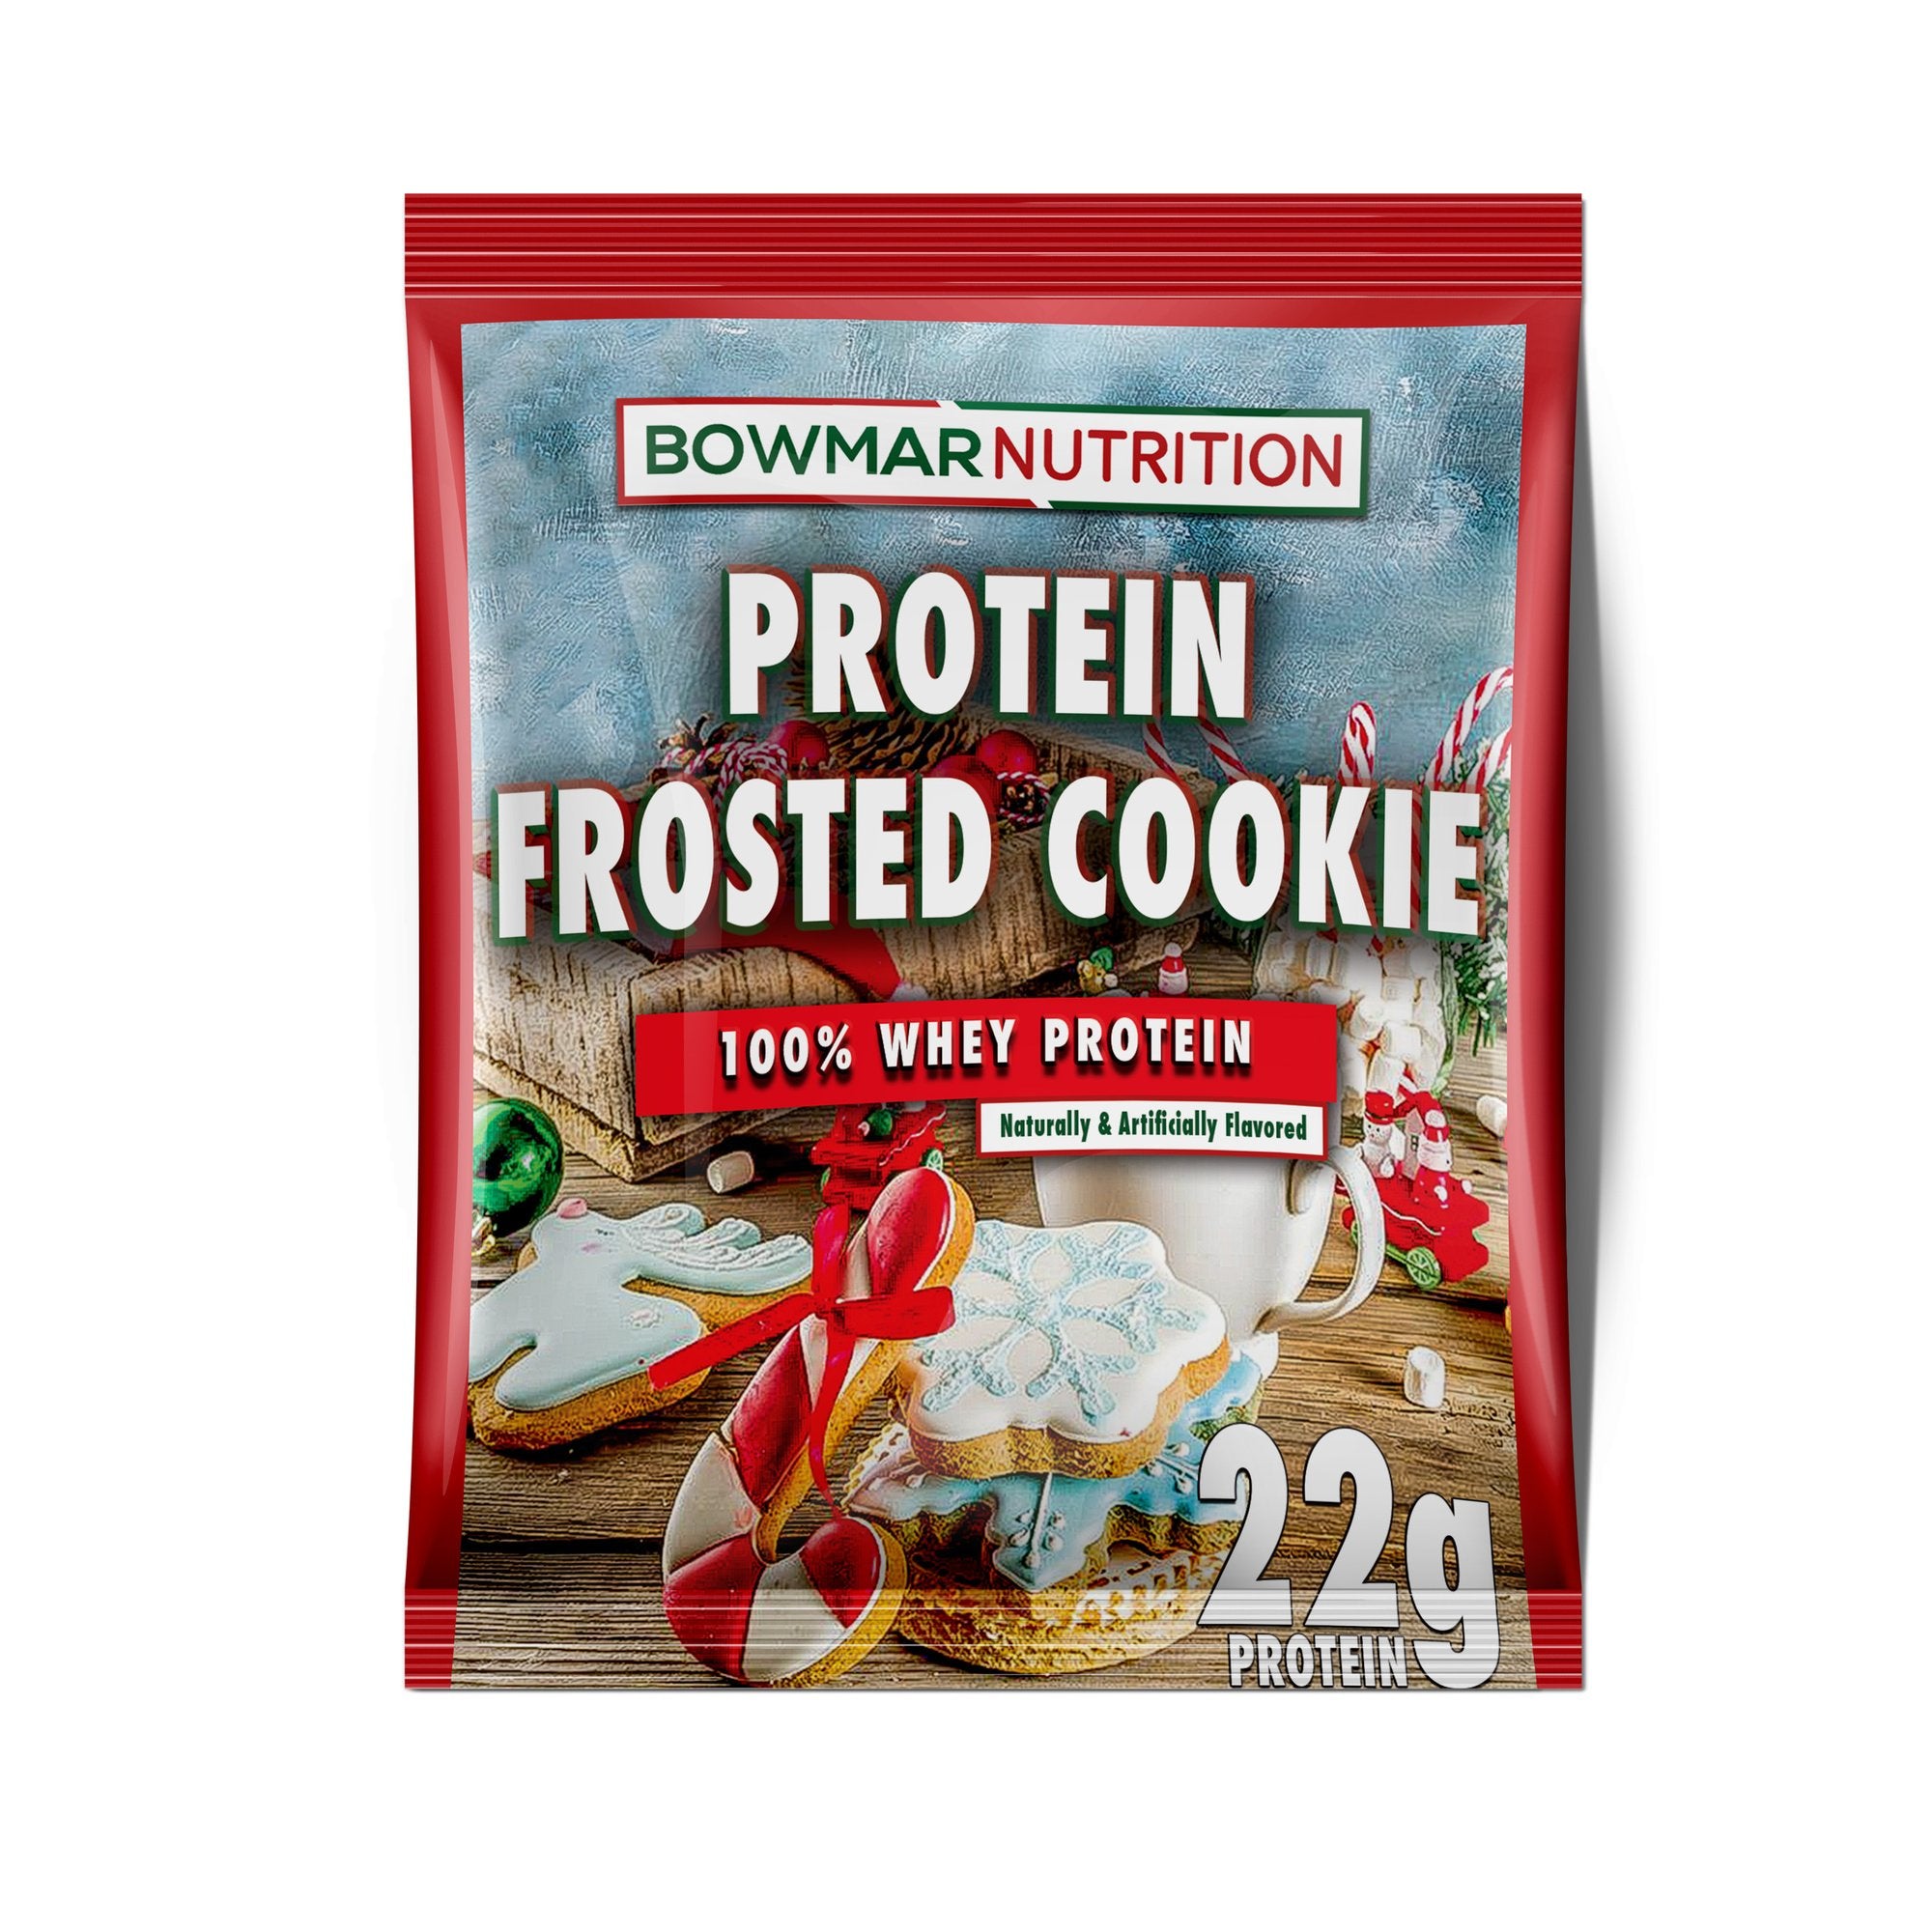 Bowmar Whey Protein Powder Sample (1 serving) Protein Snacks Frosted Cookie bowmar